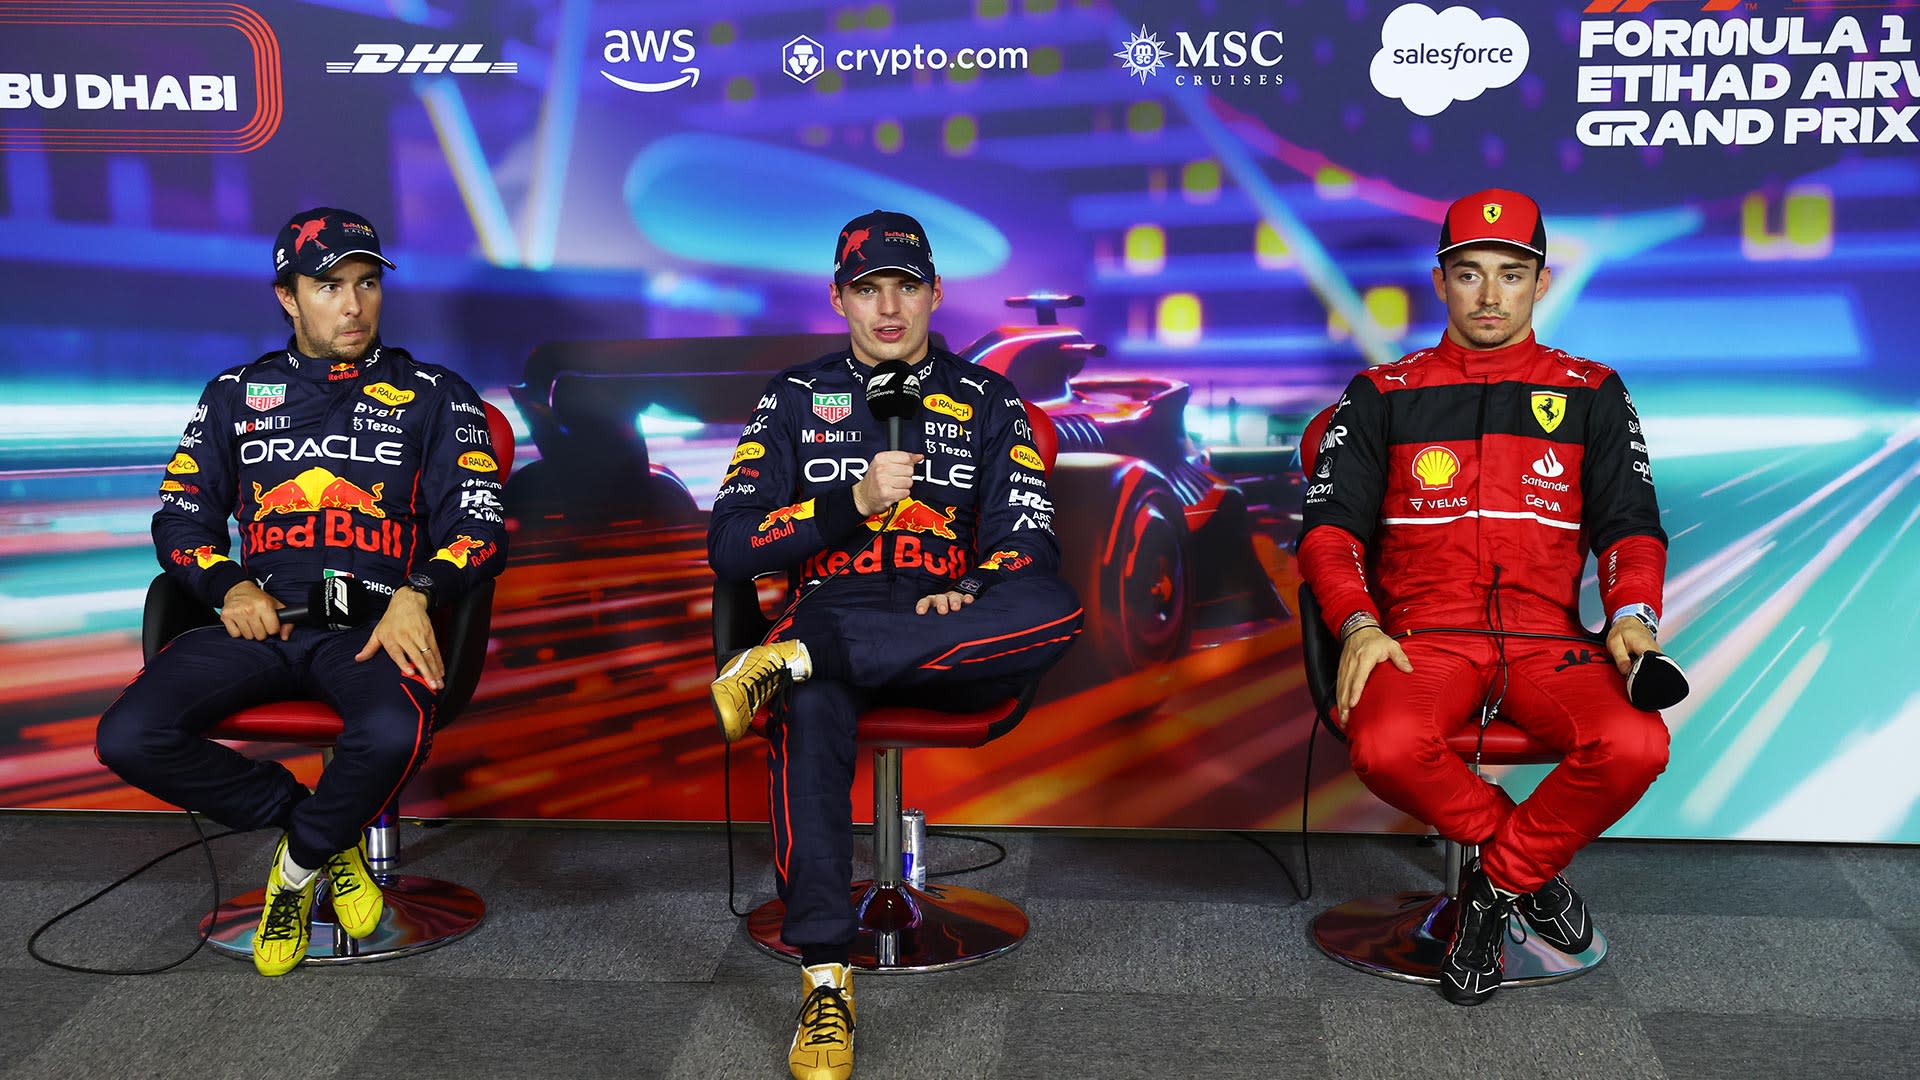 FIA post-qualifying press conference